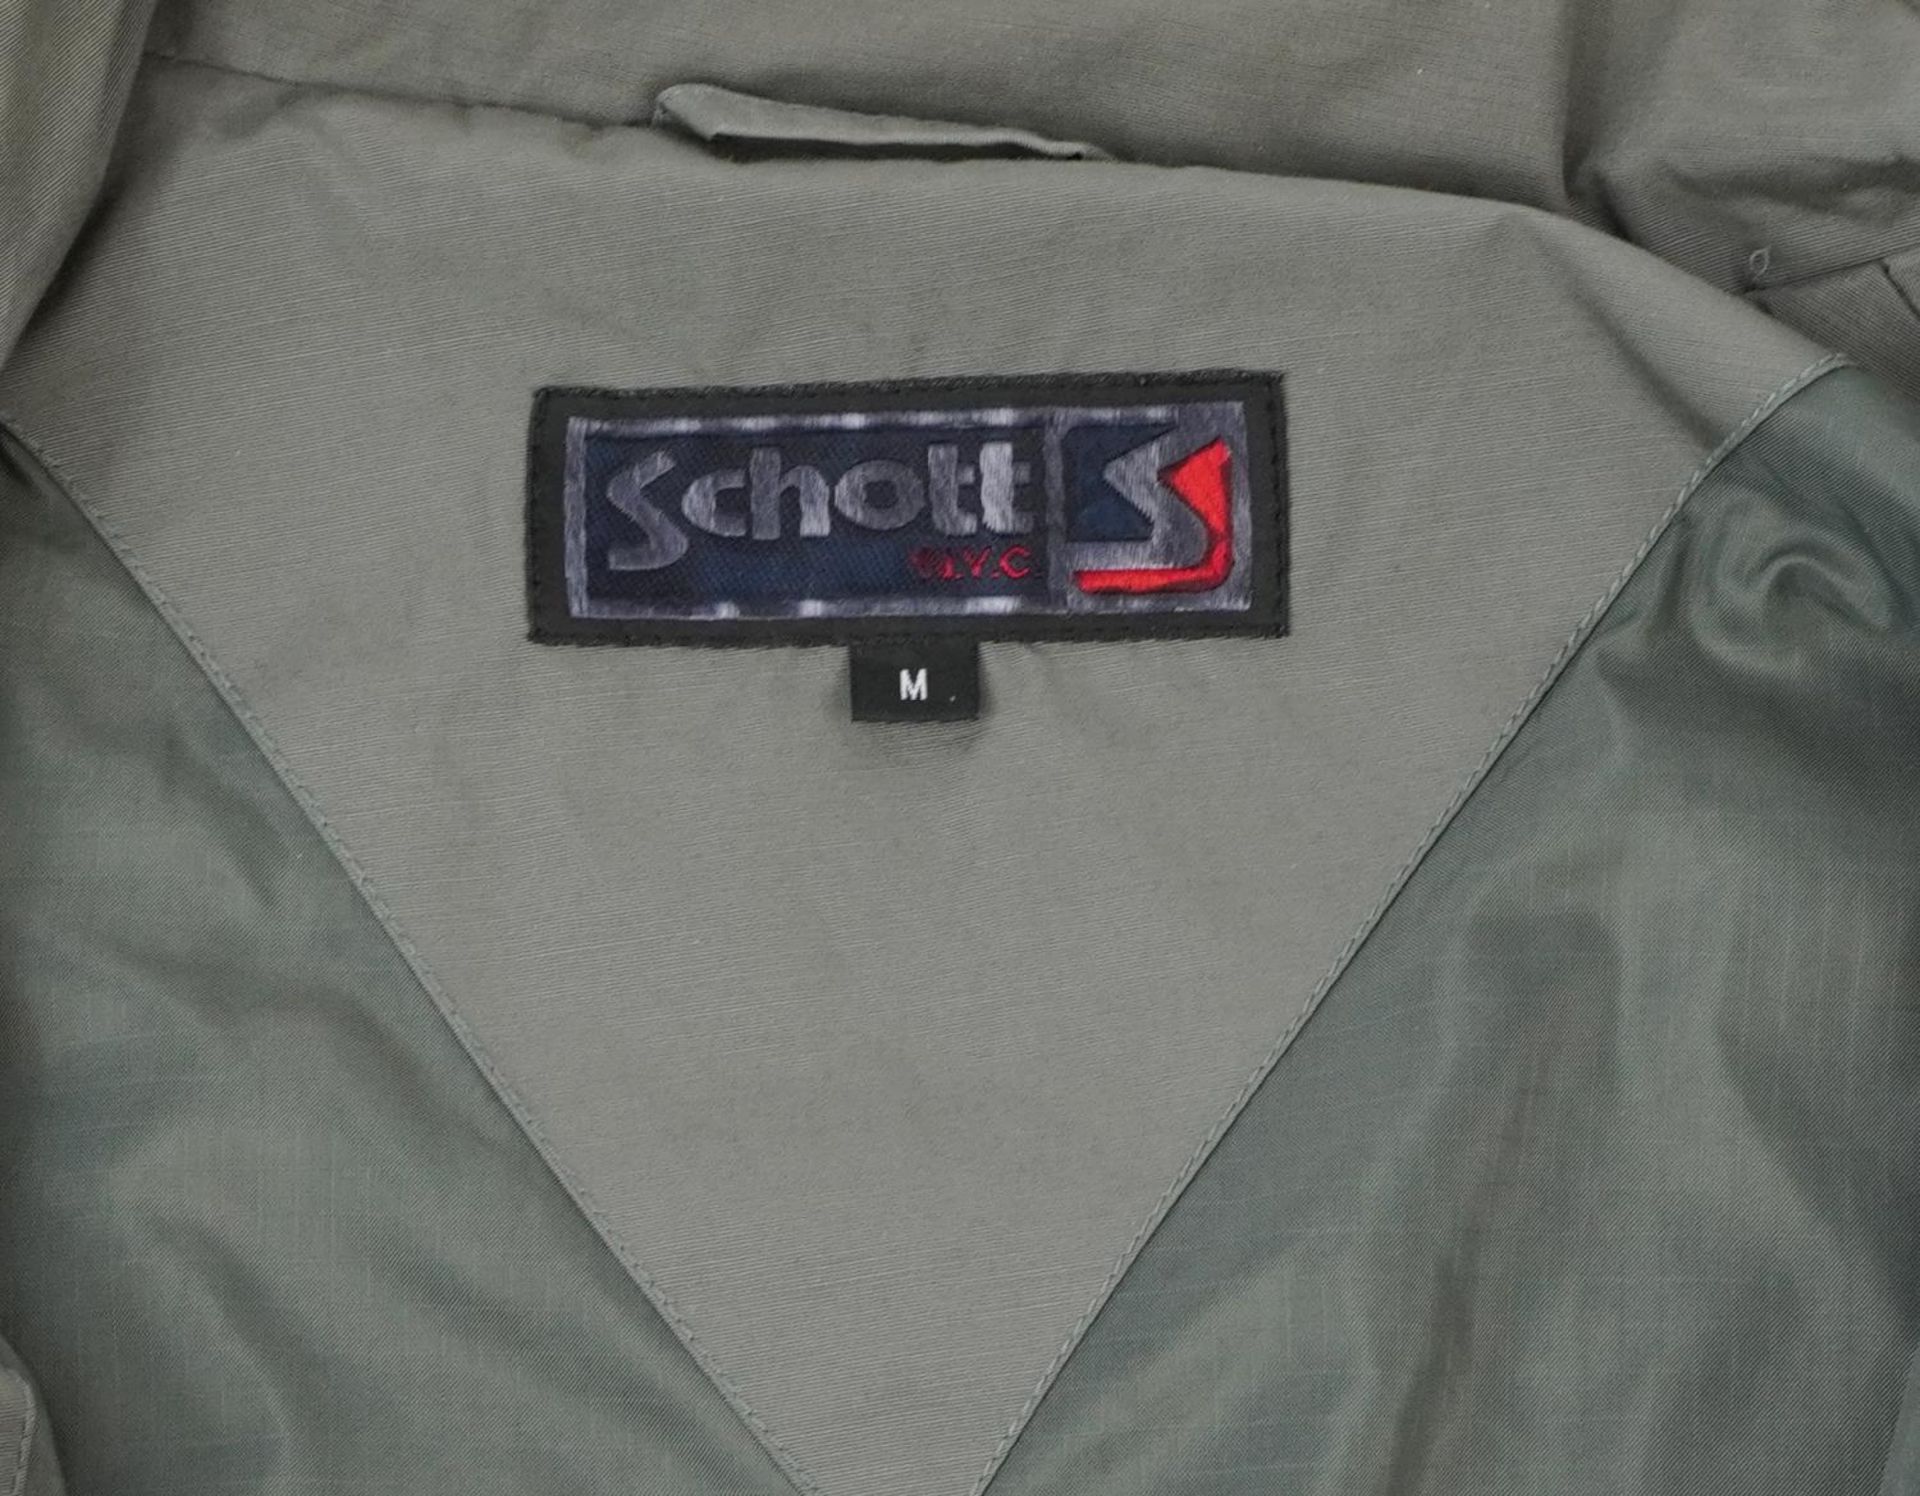 Schott gentlemen's jacket, size M : For further information on this lot please contact the - Image 2 of 3